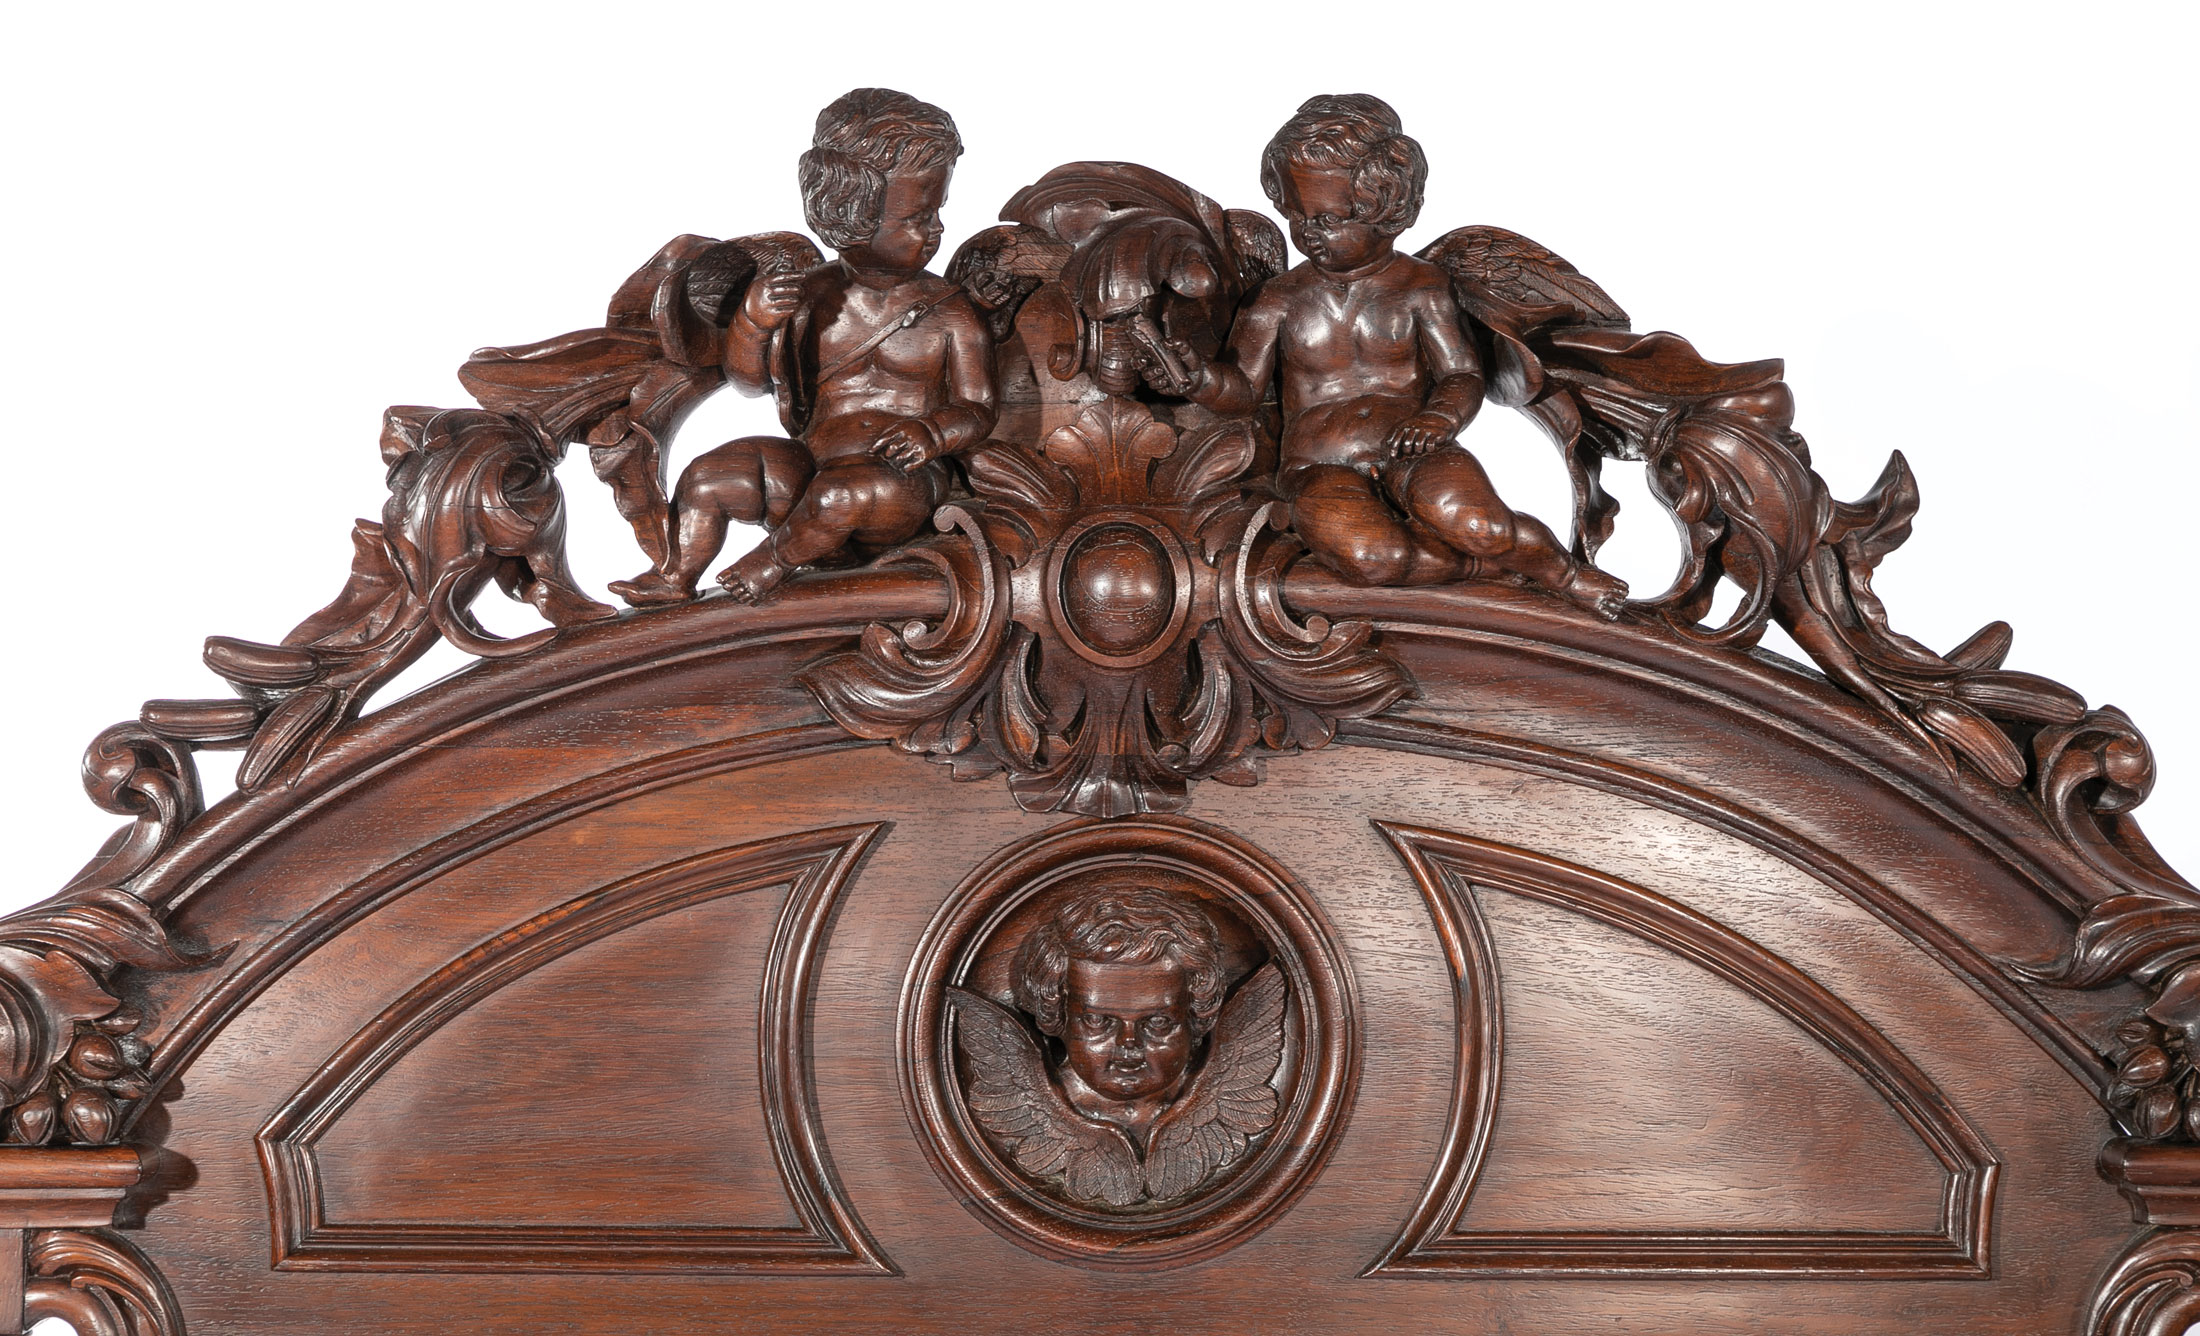 Very Fine American Carved Rosewood Bedroom Suite , mid-19th c., labeled A. (Alexander) Roux, incl. - Image 19 of 20